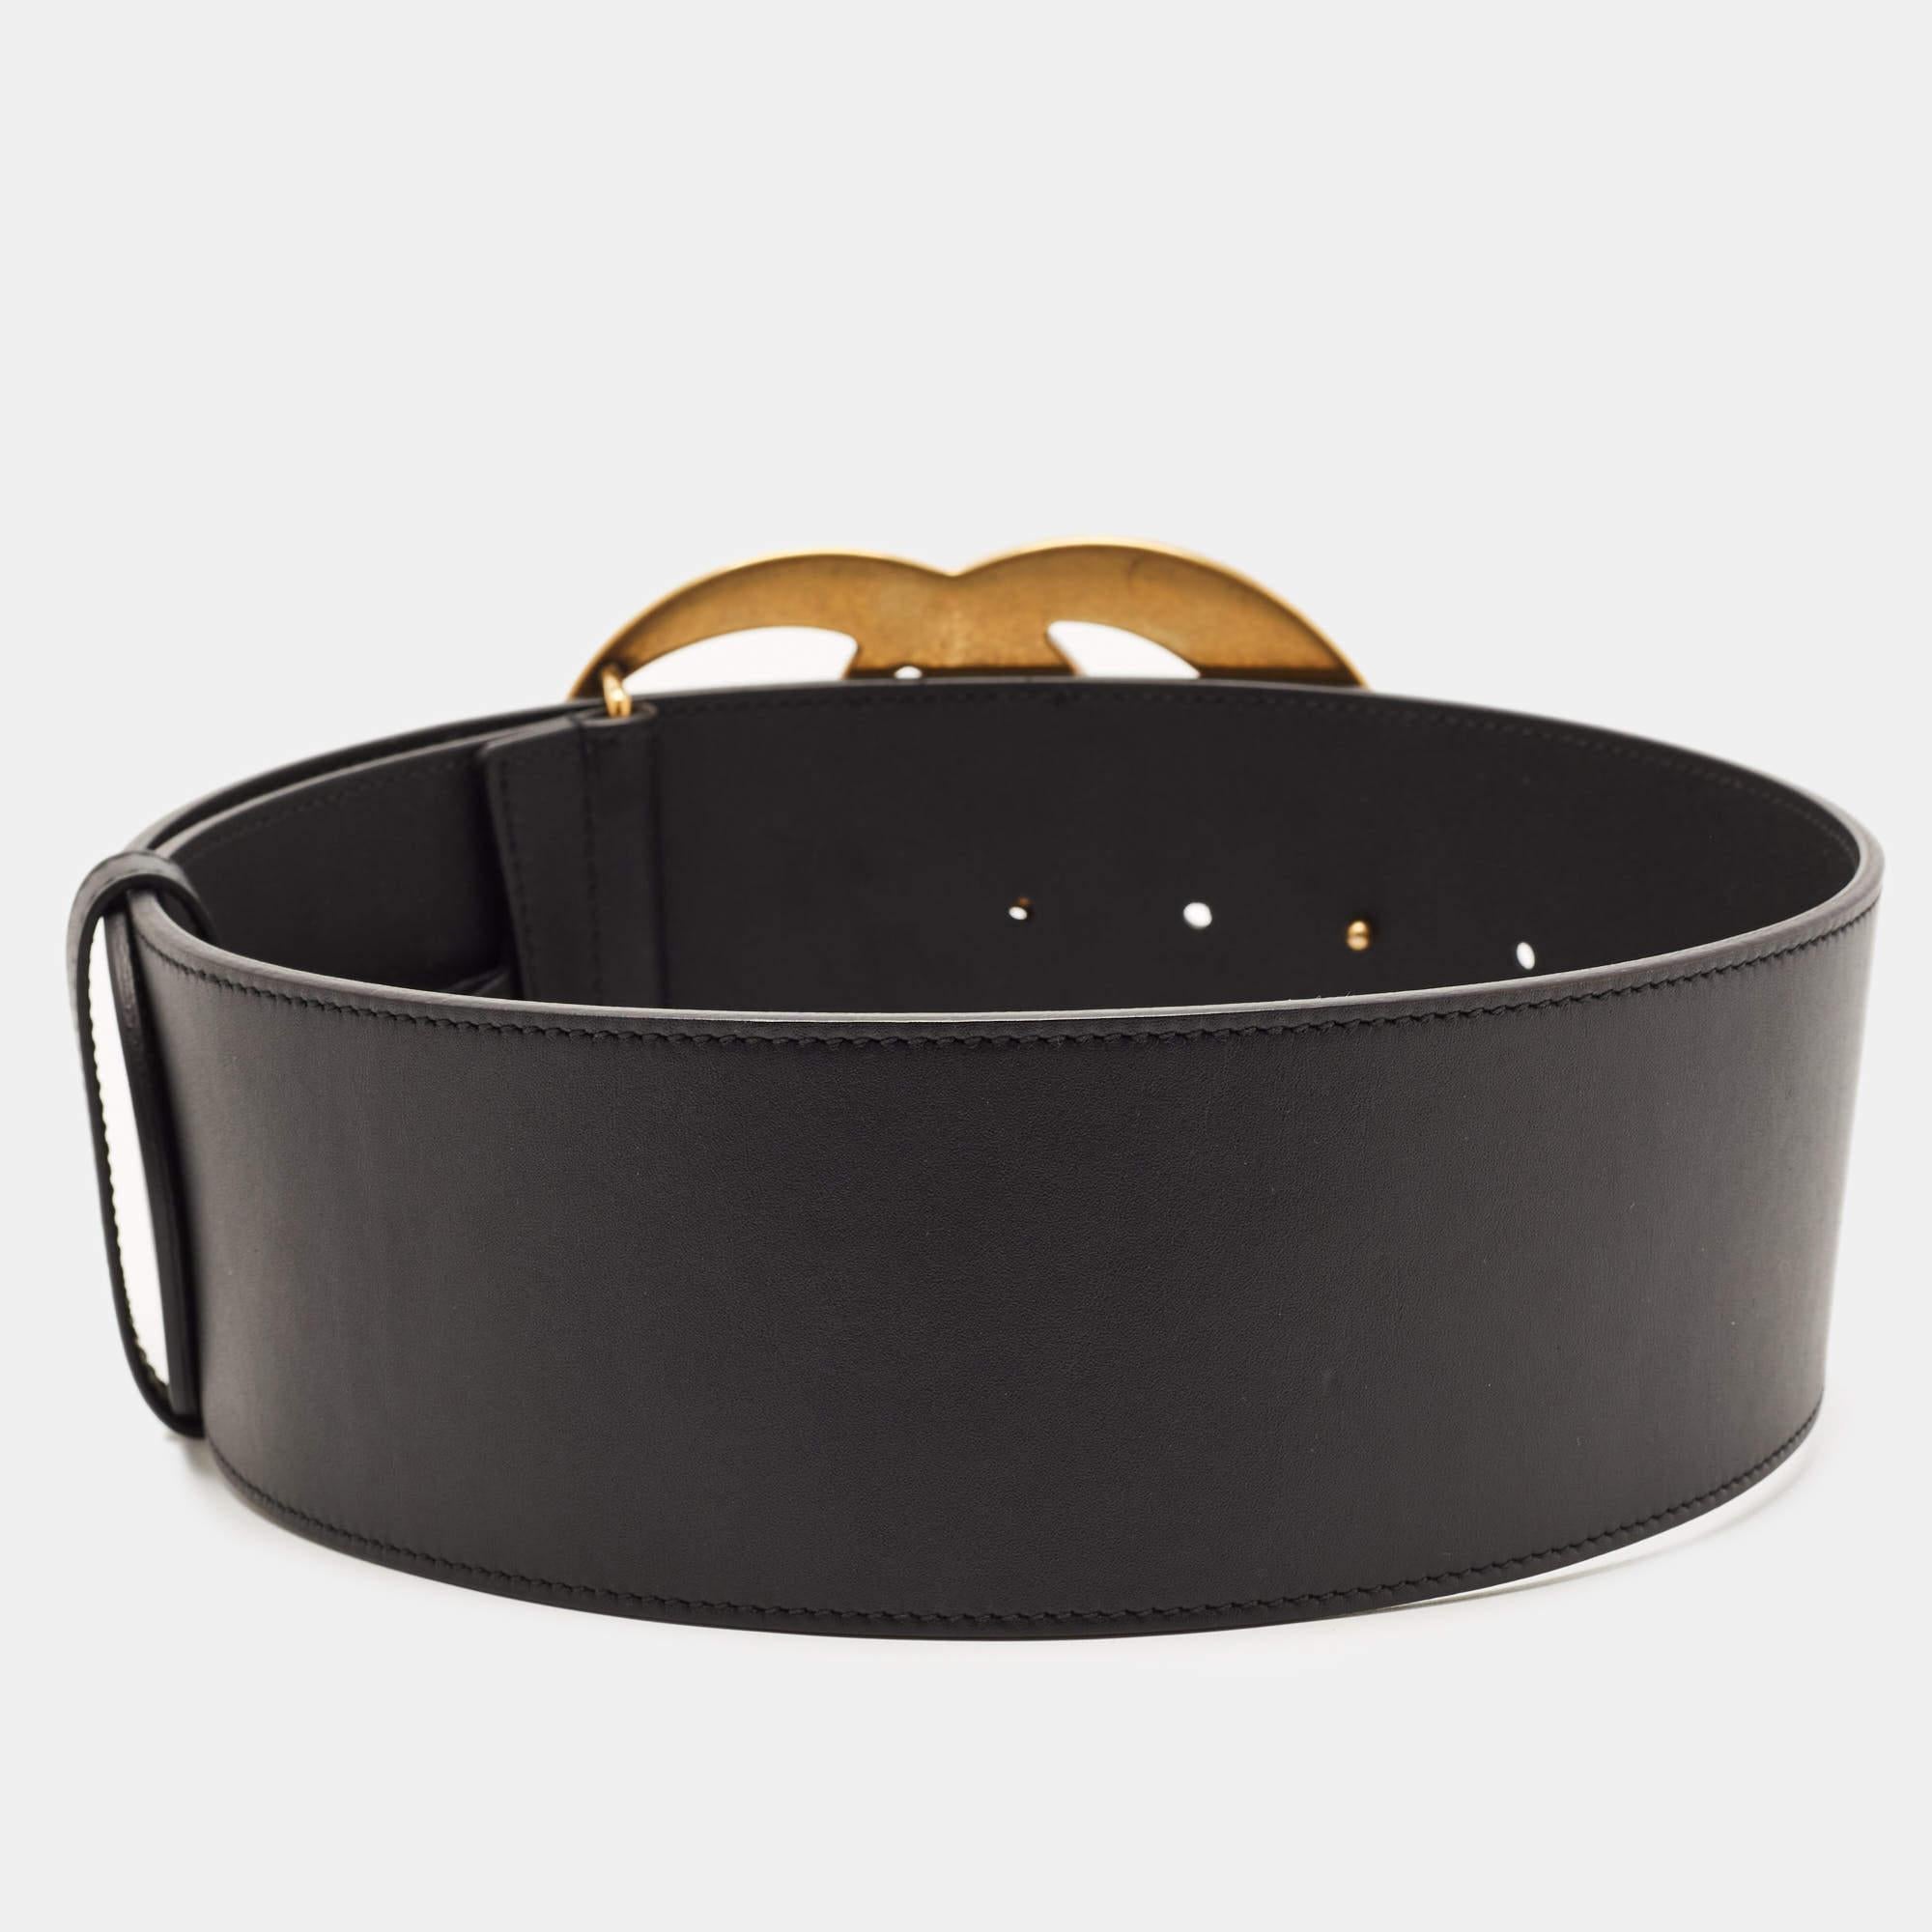 The GG Marmont belt from Gucci has found a fan in women around the globe and it's time you get one for yourself too! This chic belt comes crafted from leather and features the iconic GG buckle in gold-tone metal. It is sure to lend your dresses,